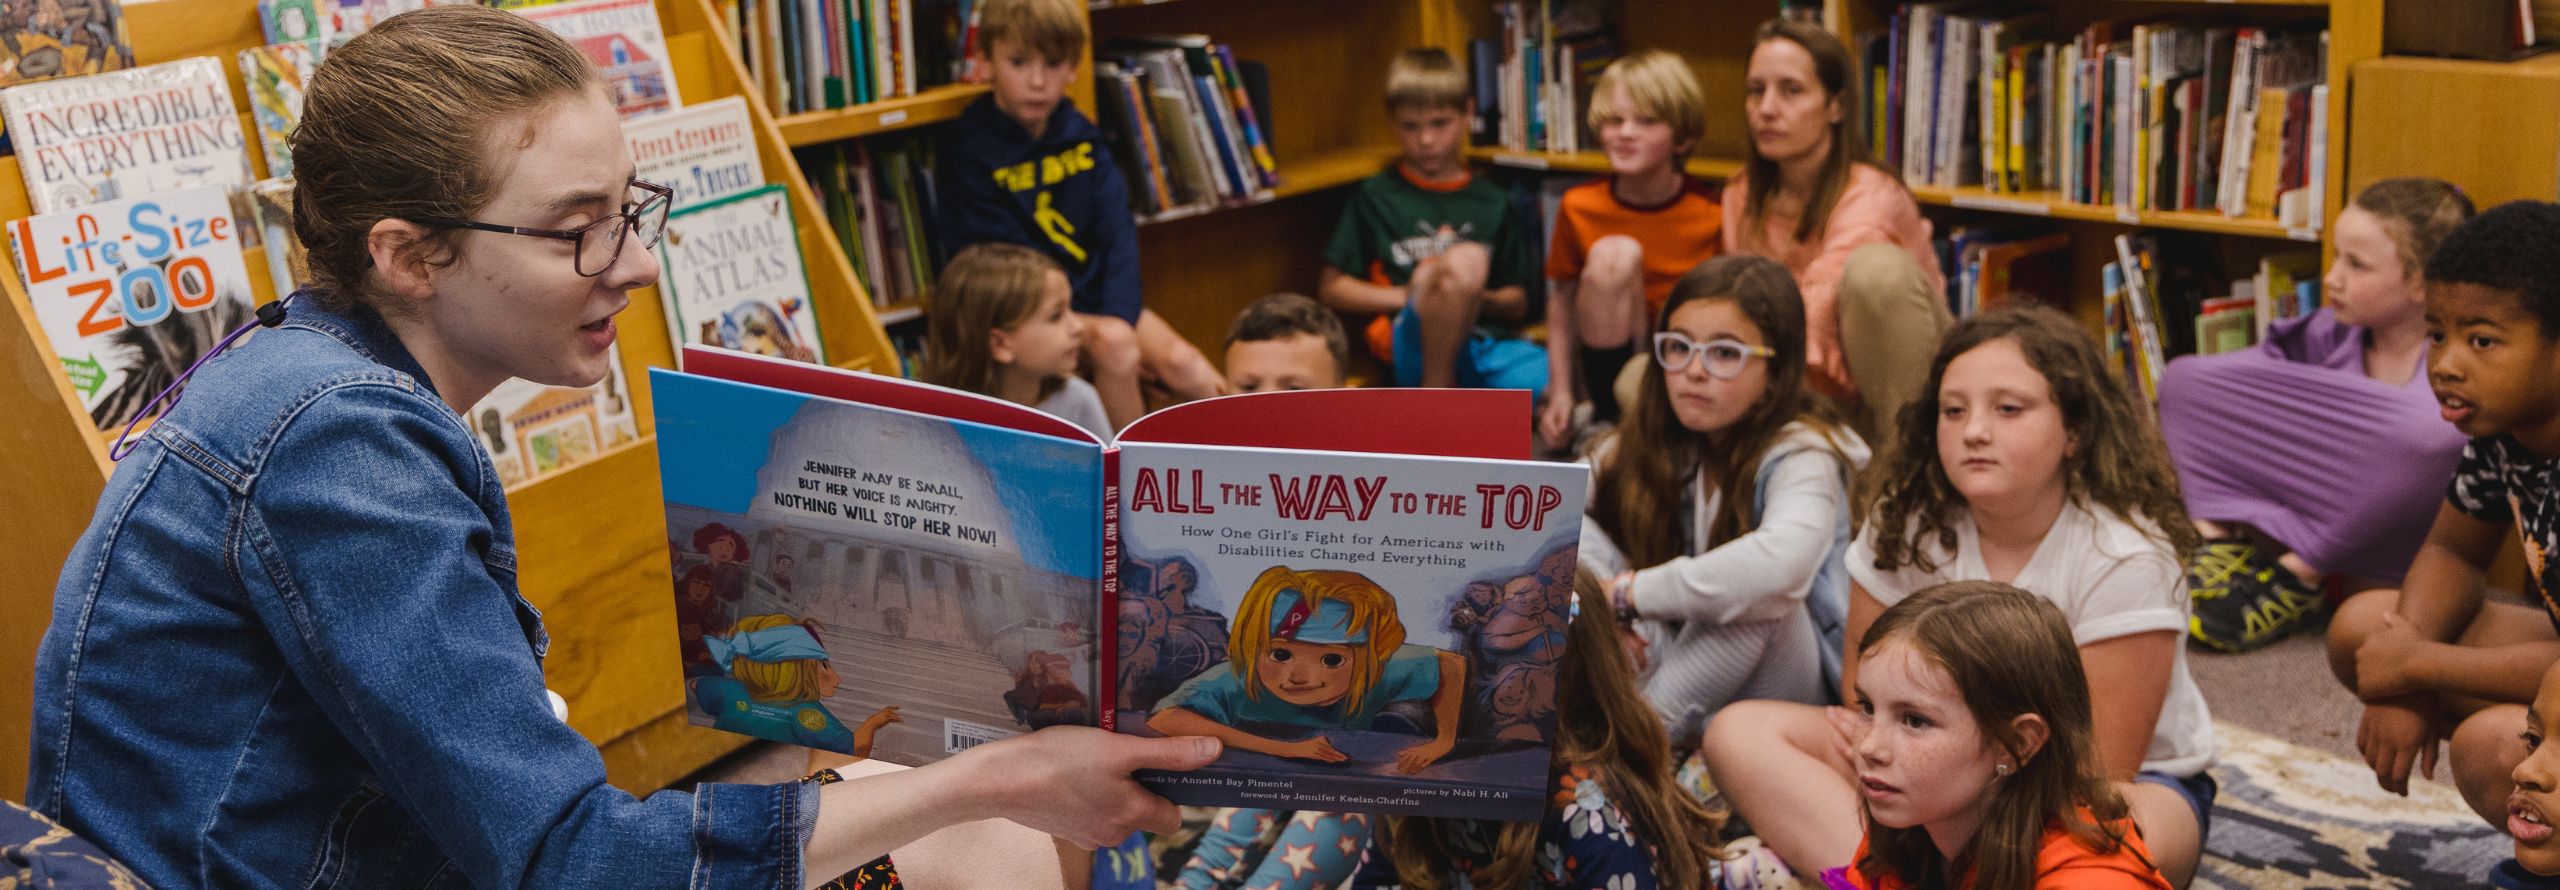 A young woman reads a picture book to a group of attentive children sitting on the floor in a cozy library setting. The bookshelves in the background are filled with colorful children's books, creatin